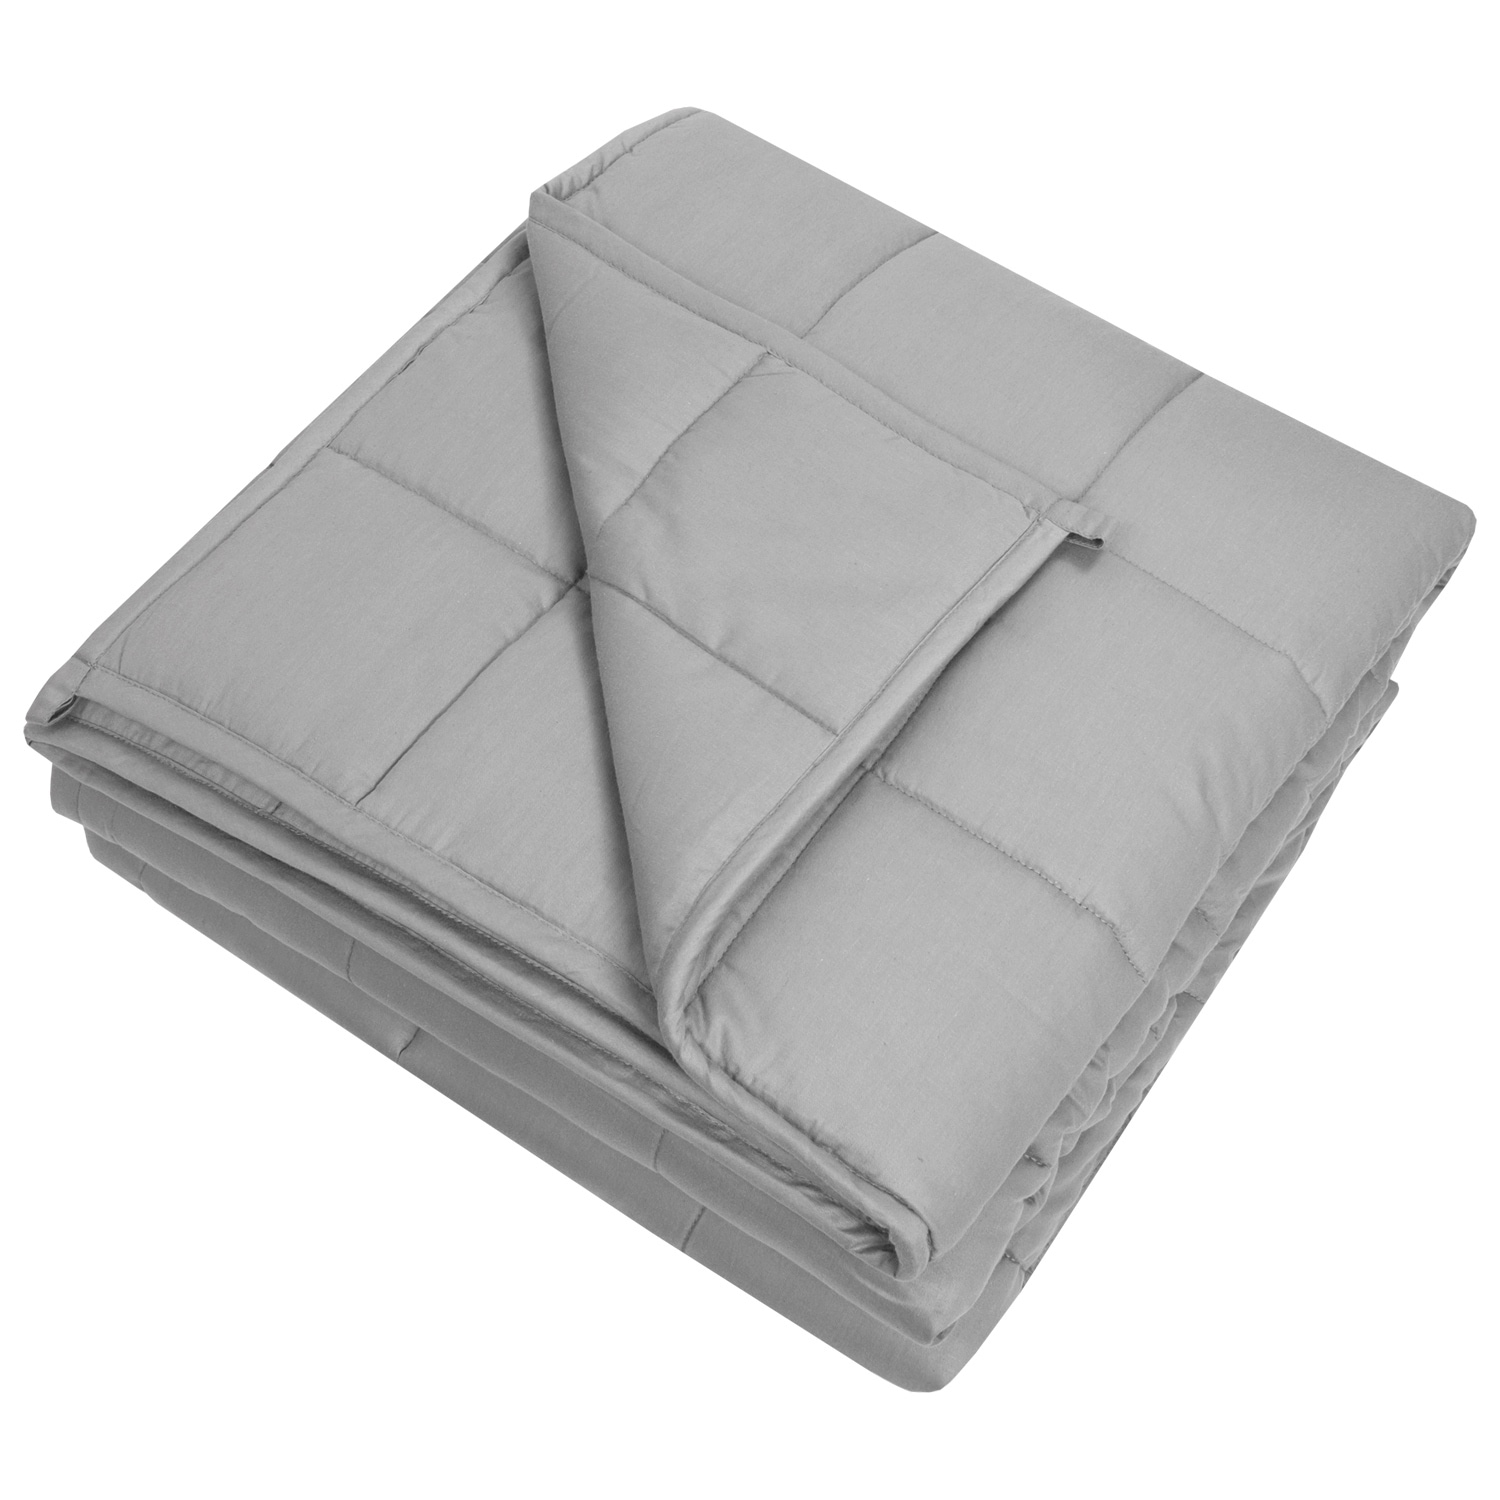 Highams Weighted Blanket 100% Cotton Sensory Anxiety Sleep Therapy